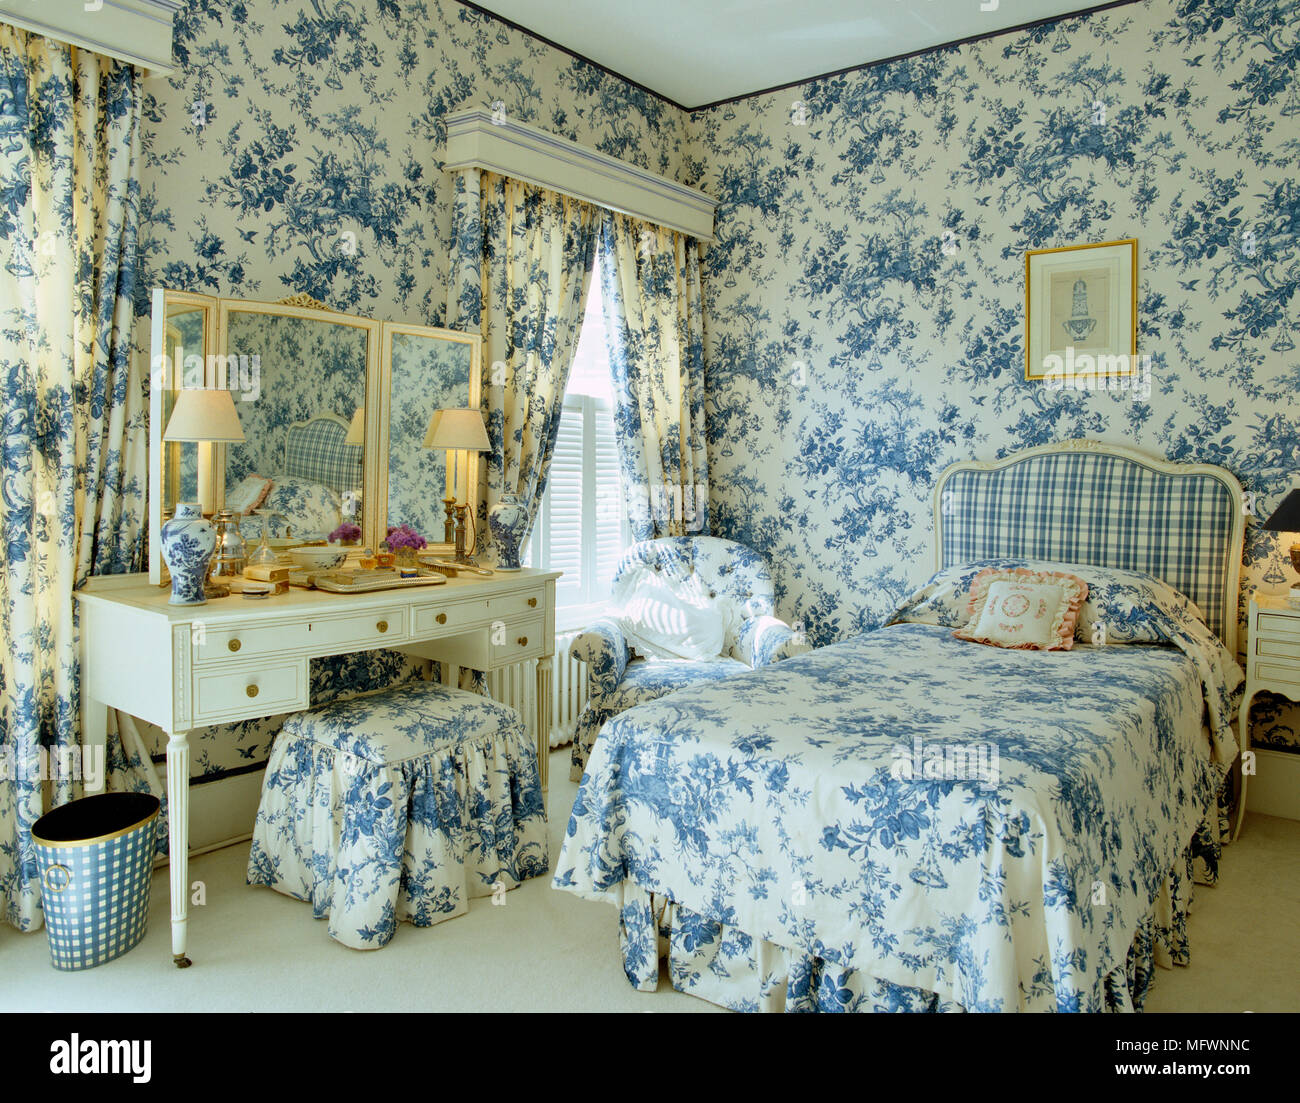 Single bed with blue and white toile de Jouy bed linen and coordinating curtains Stock Photo